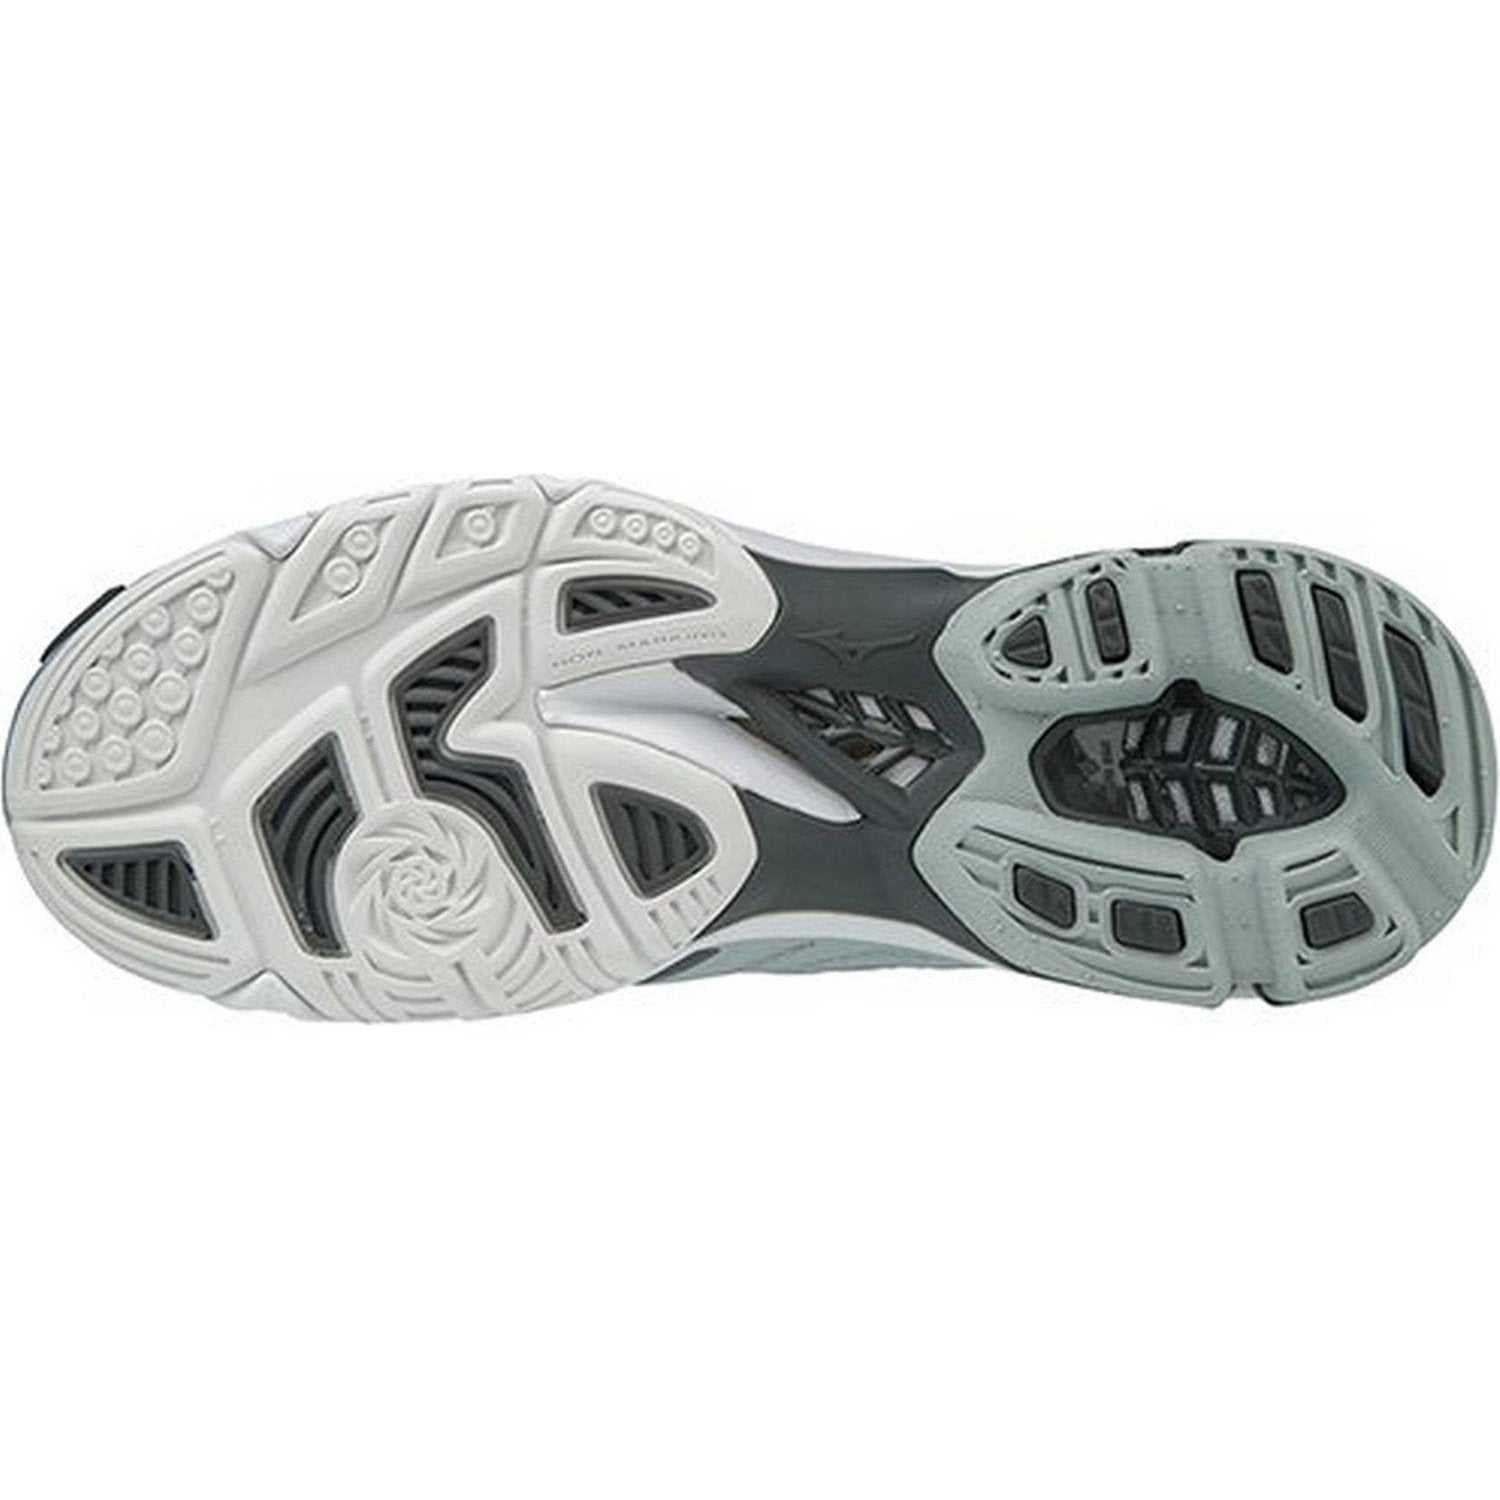 Mizuno Wave Lightning Z5 Womens Volleyball Shoes - Gray